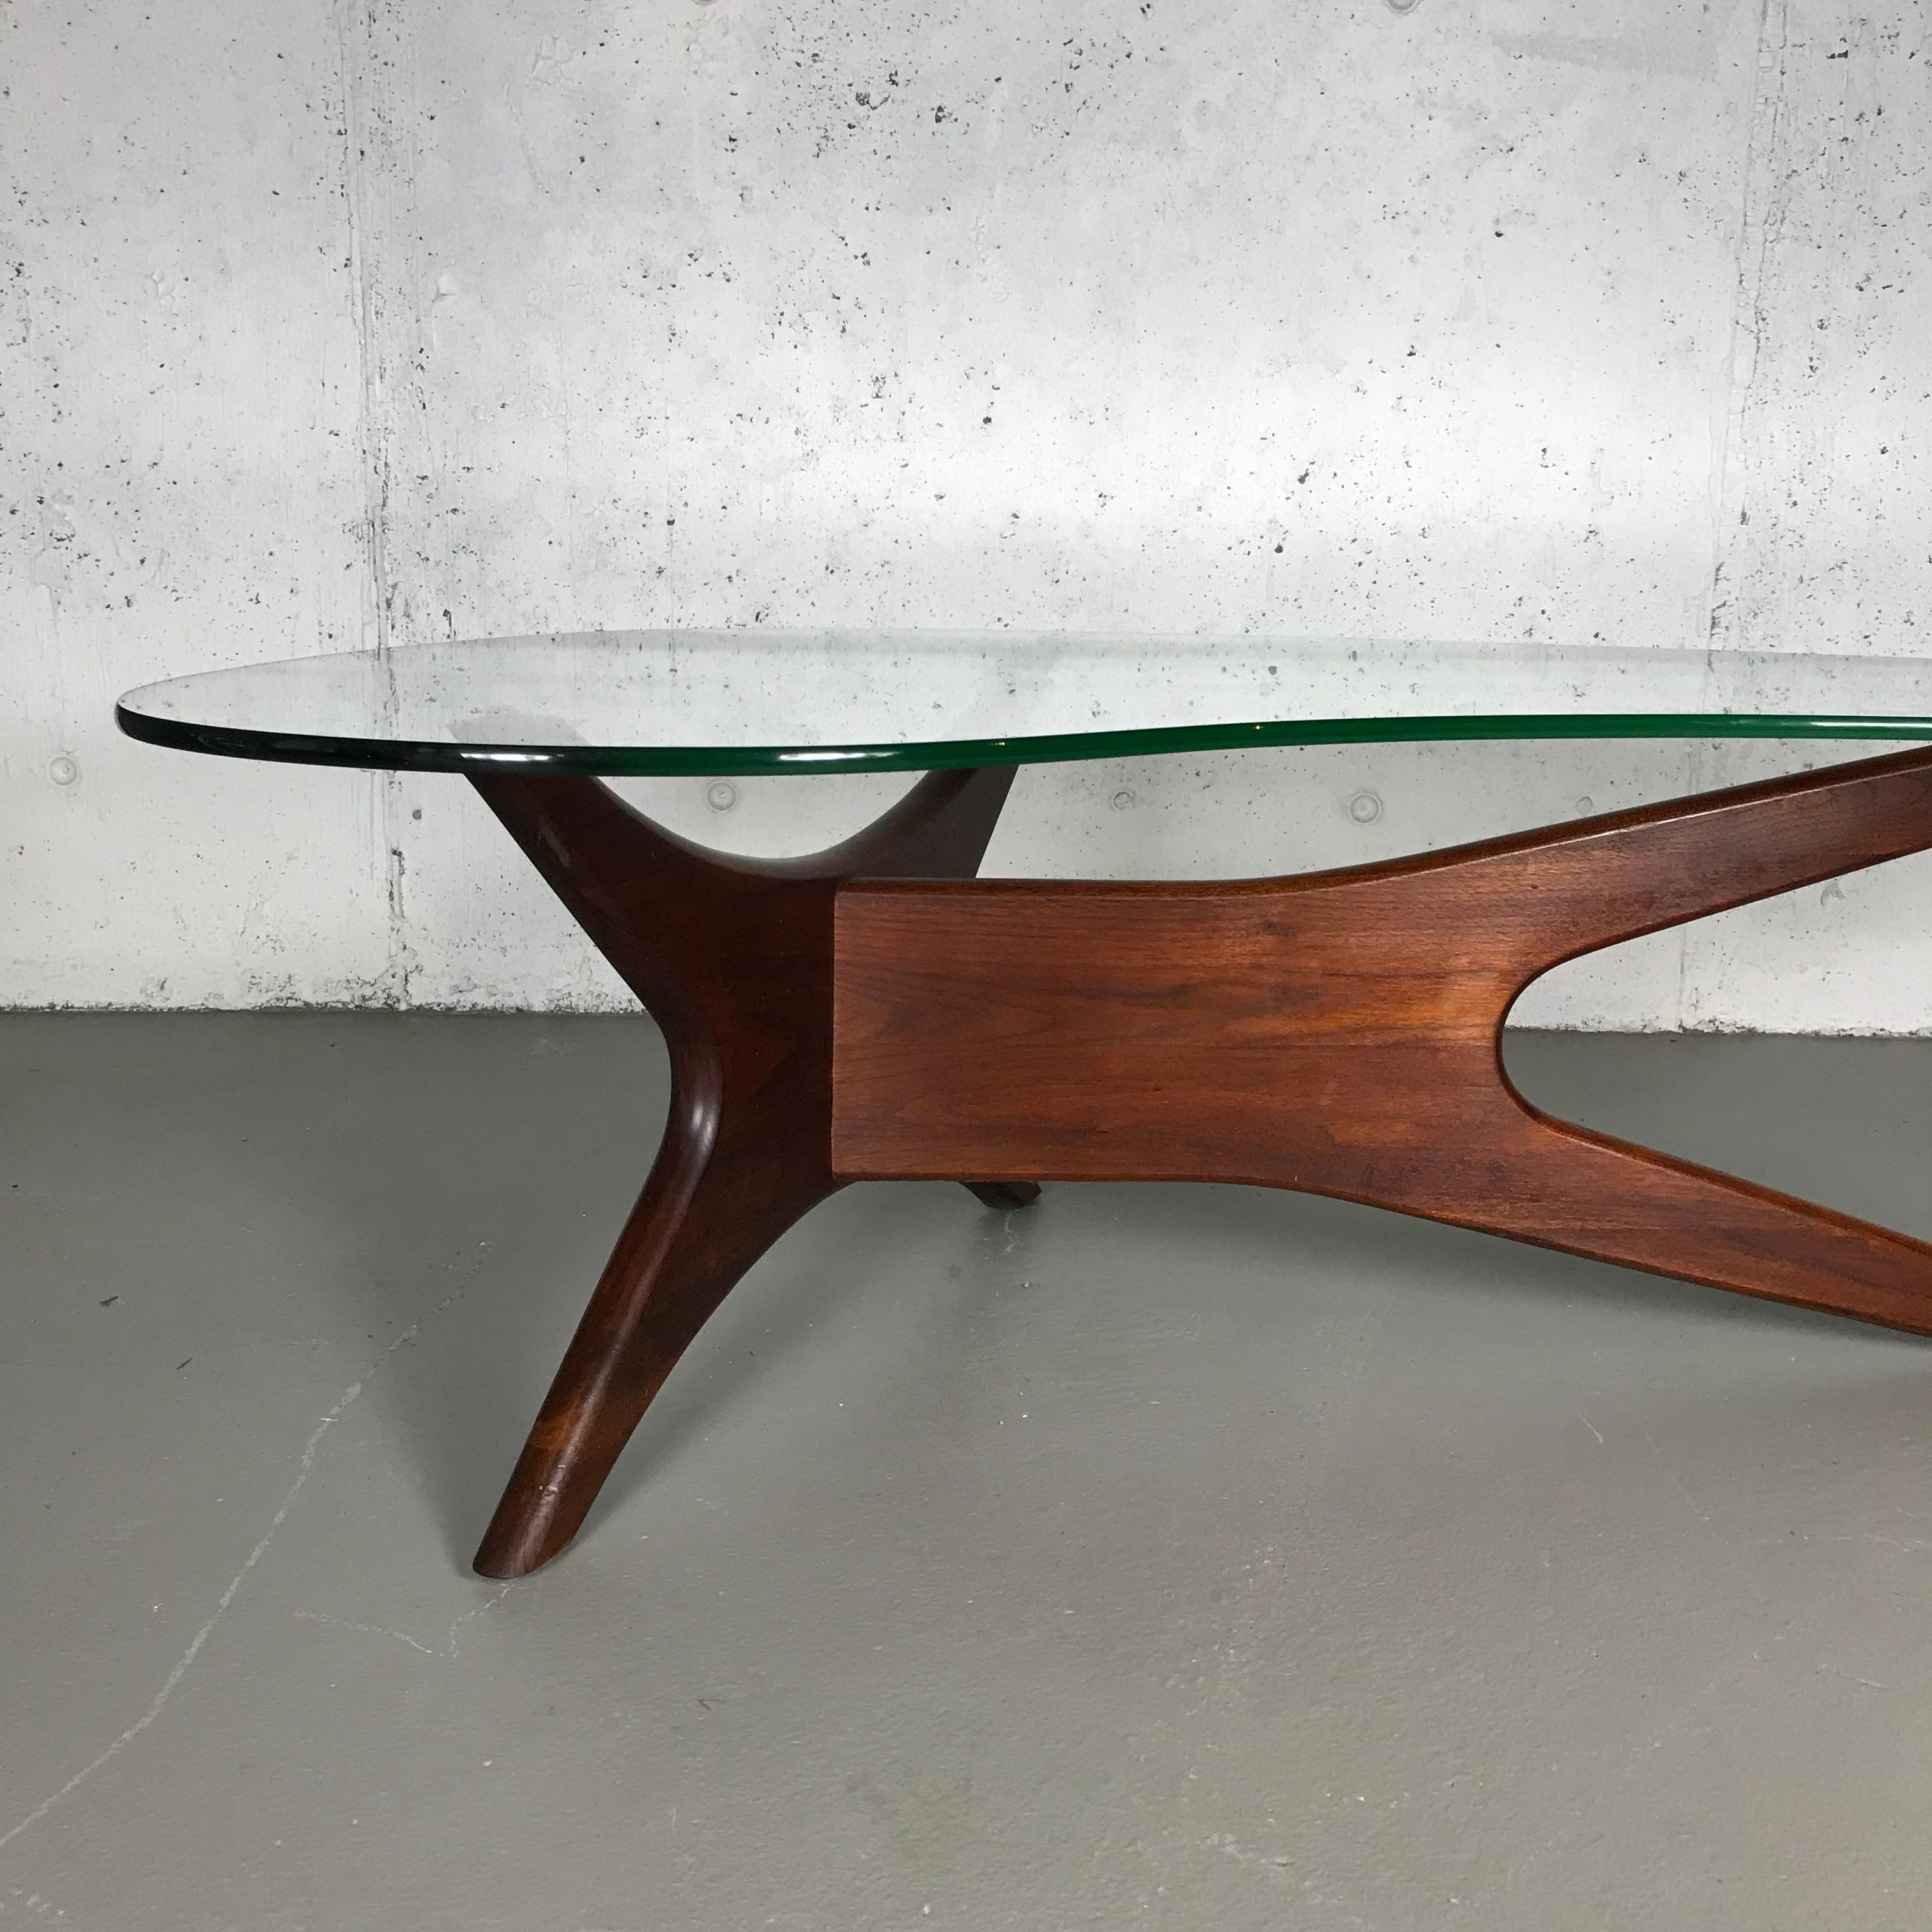 Beautiful sculptural walnut and amoeba shaped glass coffee table by Adrian Pearsall for Craft Associates, 1960s. The table is in original condition with some hard-to-see abrasions to the legs and a few noticeable scratches on the glass. If you would